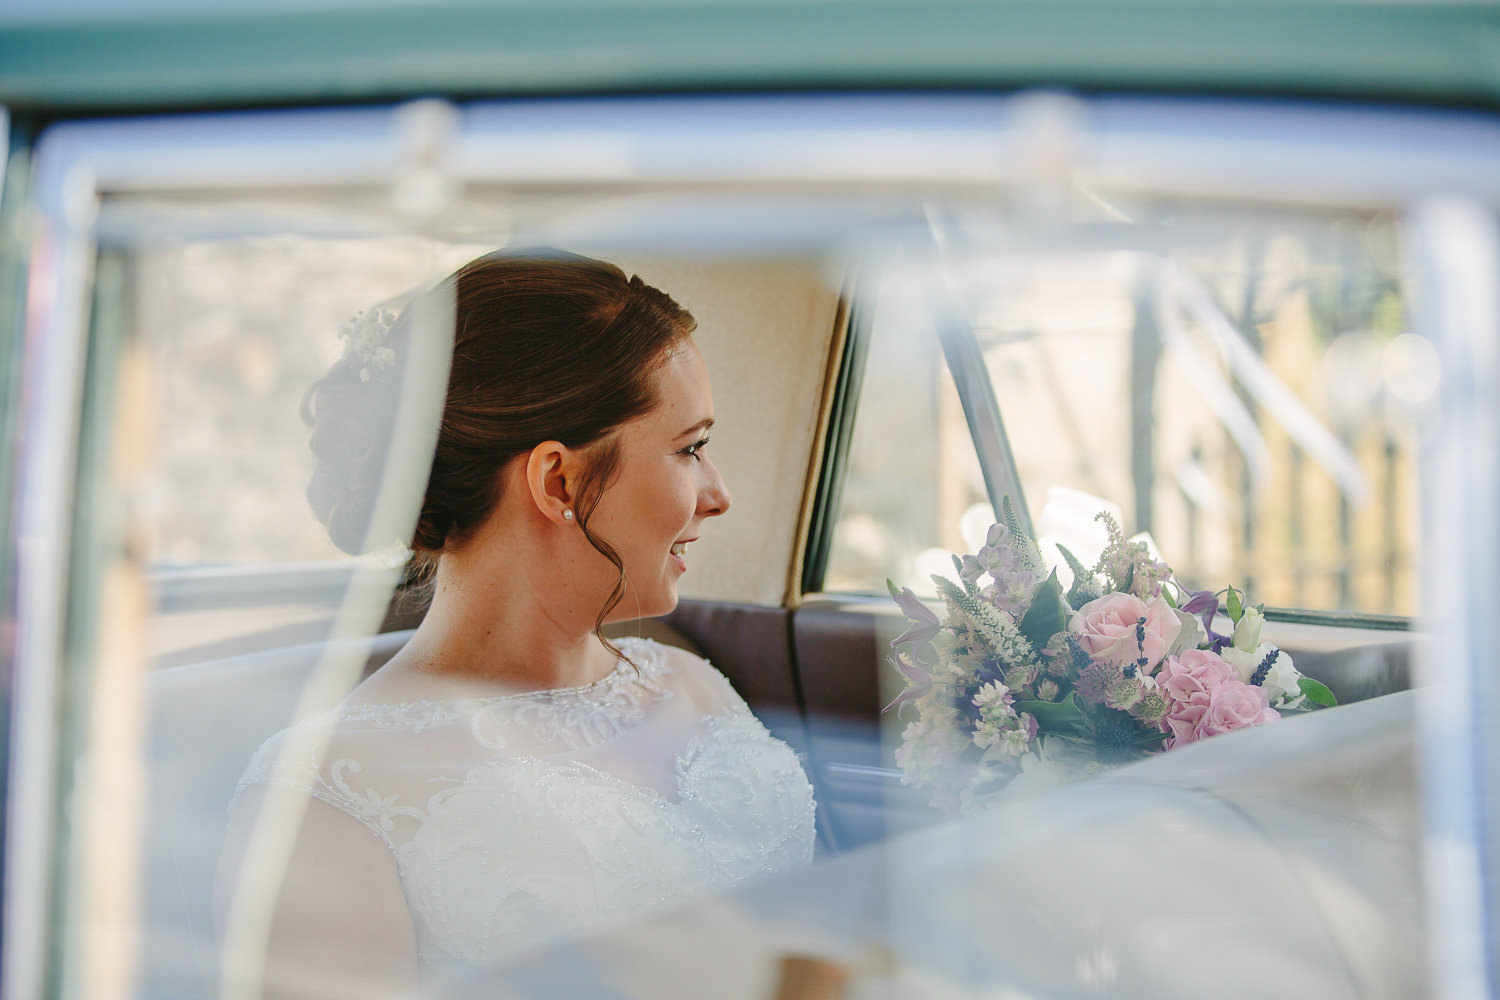 Bride in wedding car, looking out of the window.